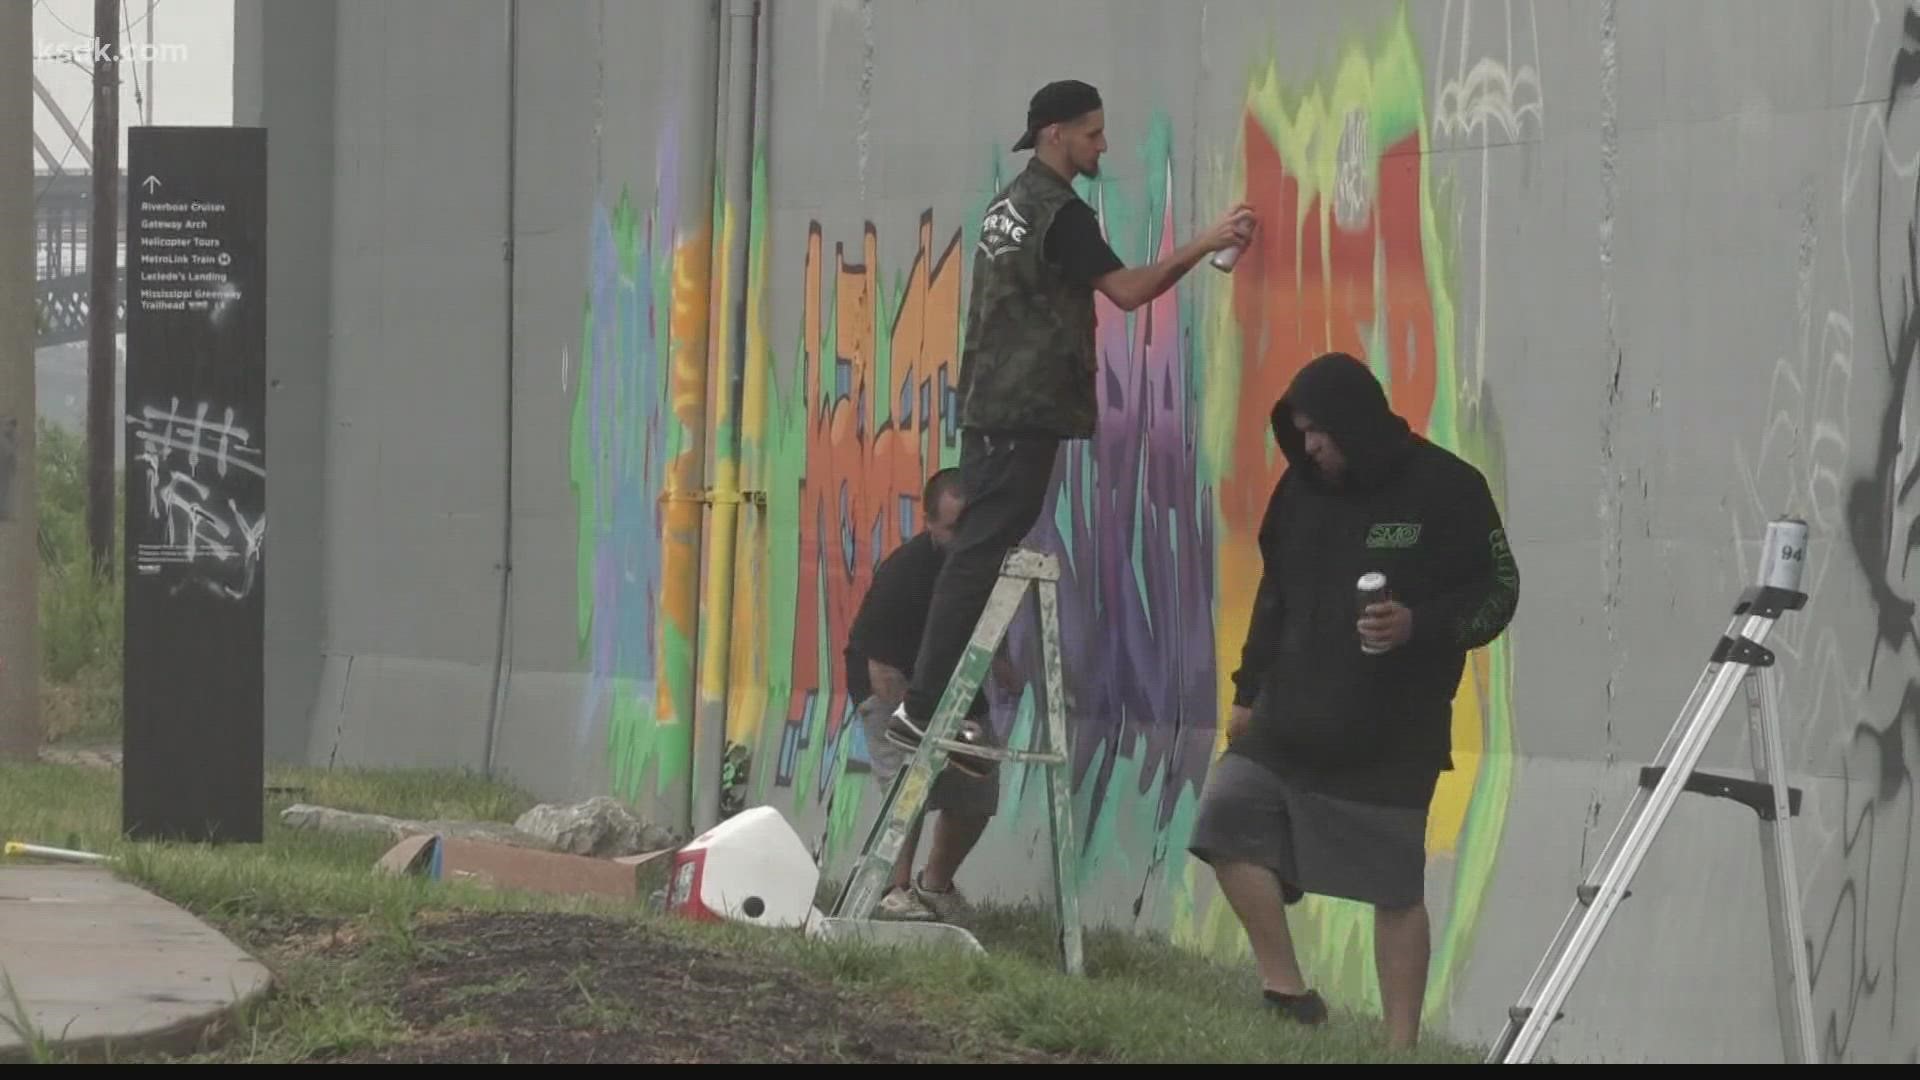 Graffiti artists and muralists from around the world are creating works of art that will bring the community together.